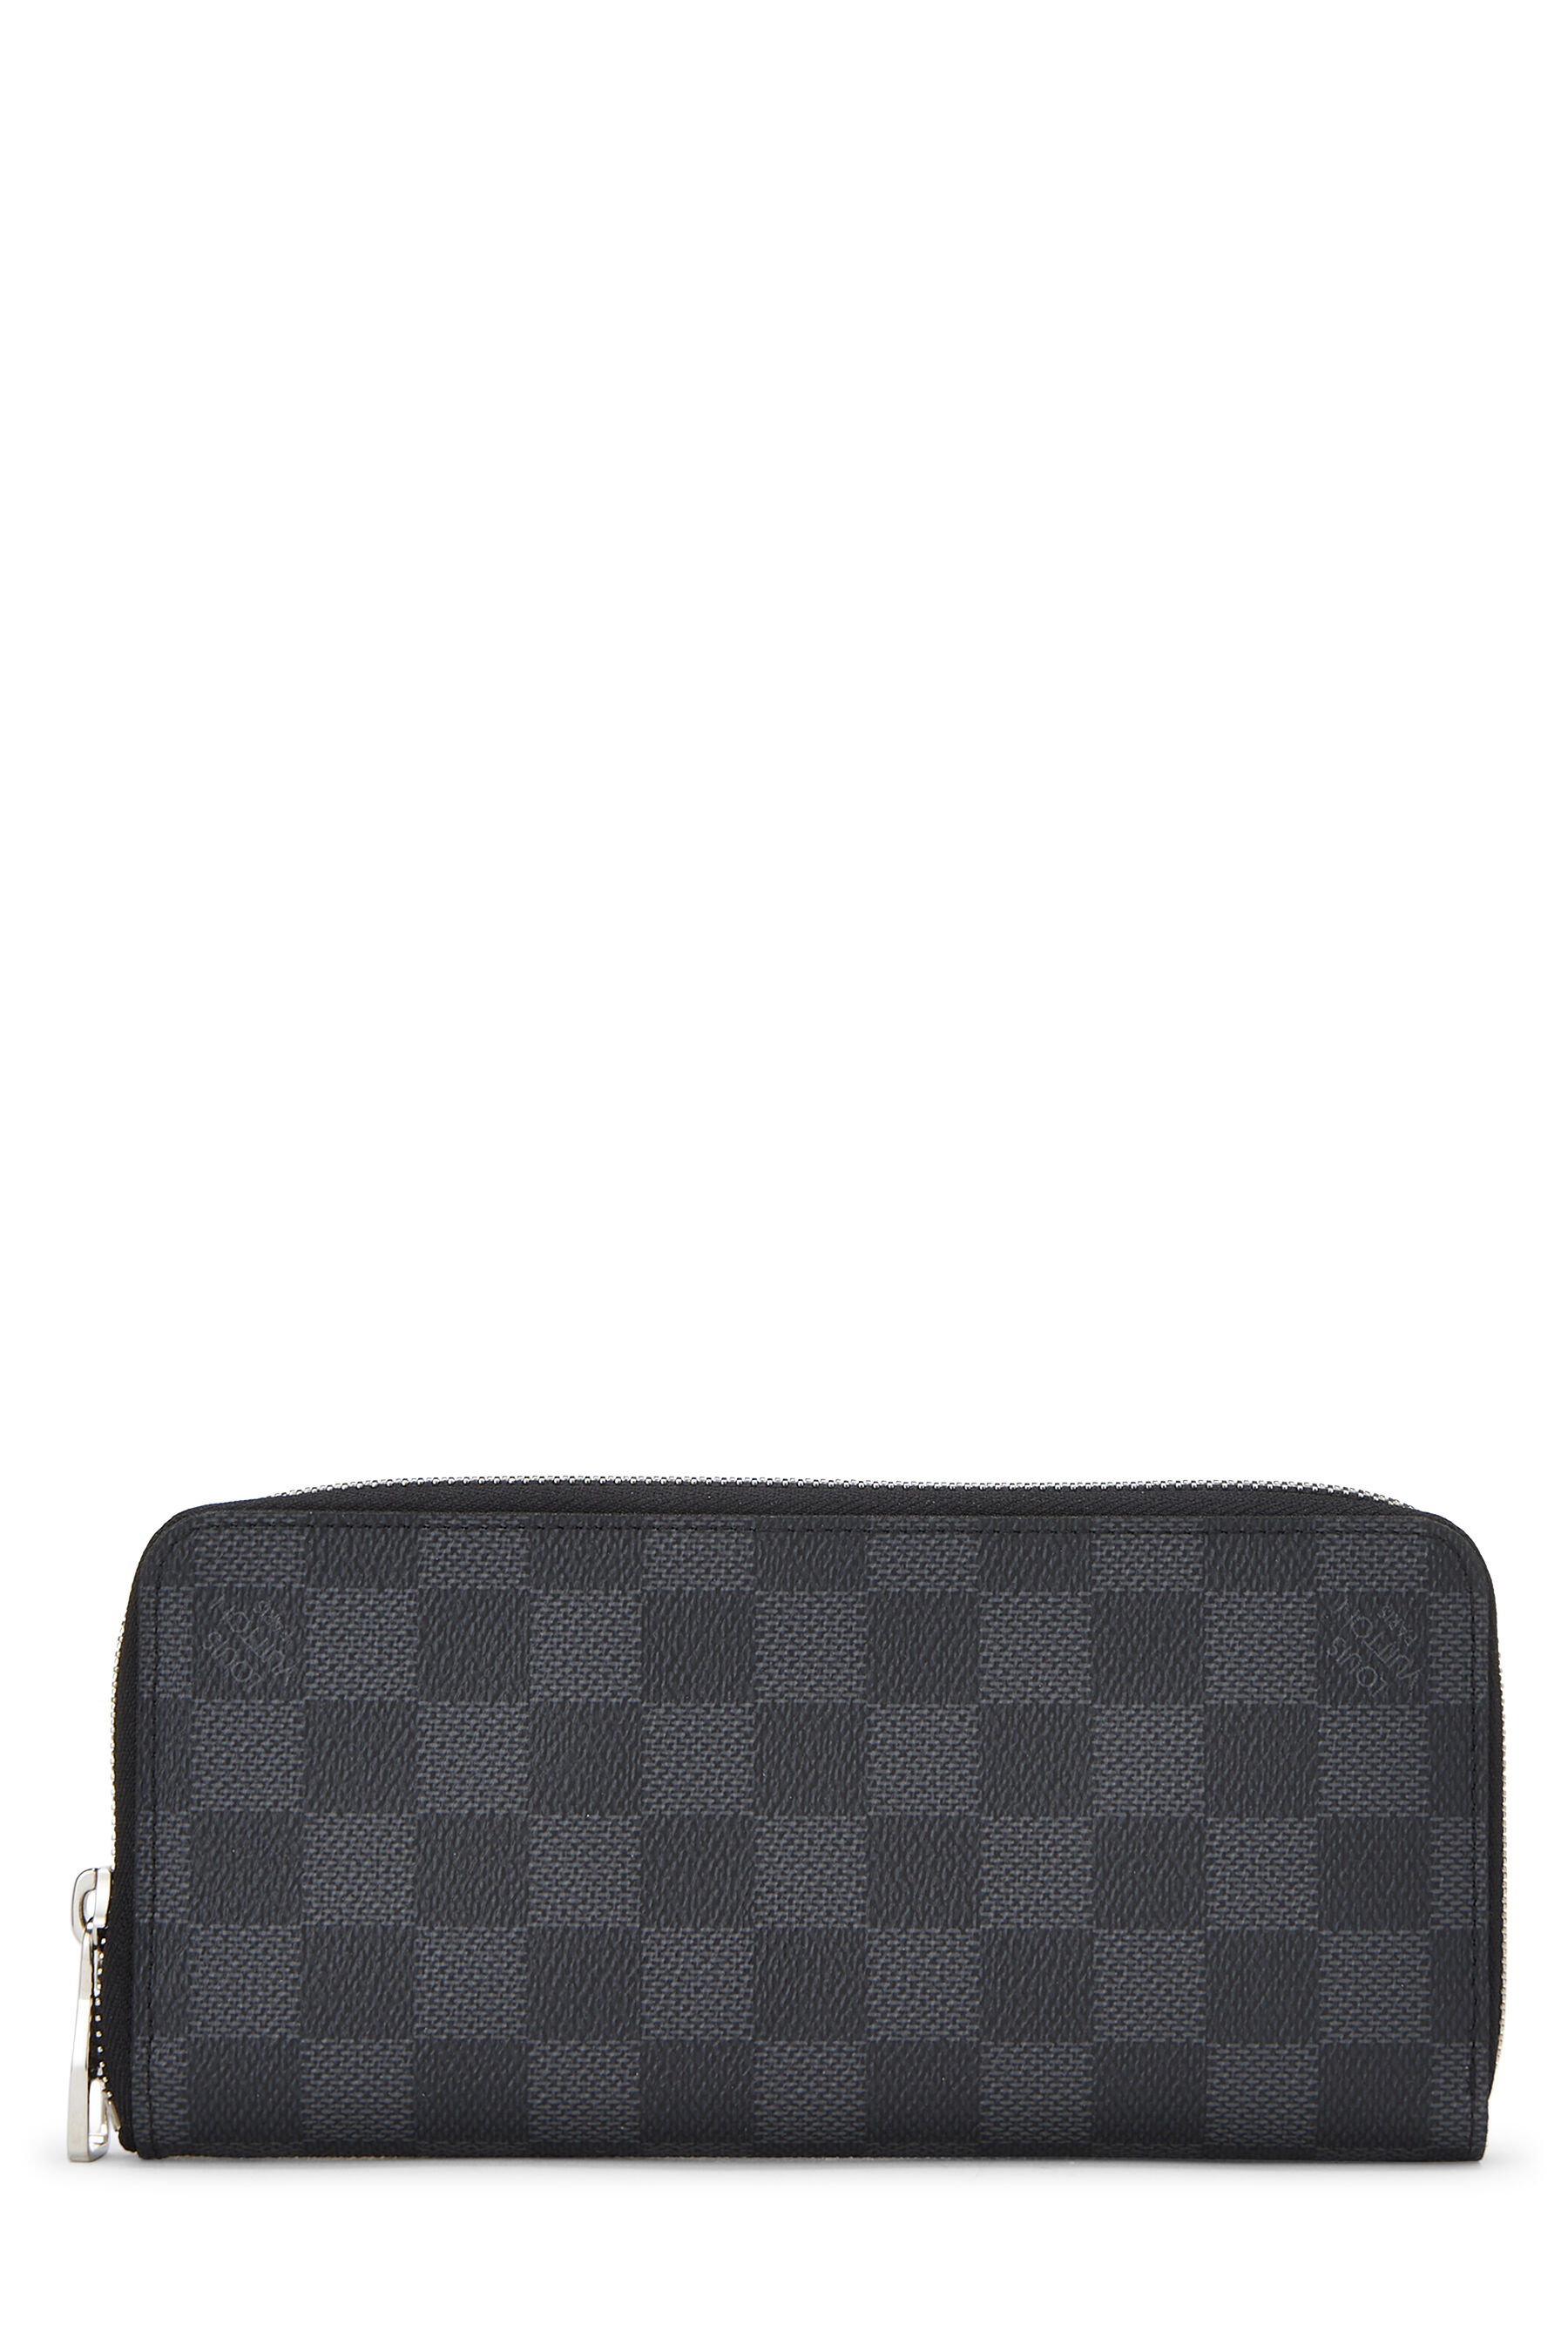 Louis Vuitton Brazza Wallet Monogram Shadow Black in Coated Canvas with  Brass - US